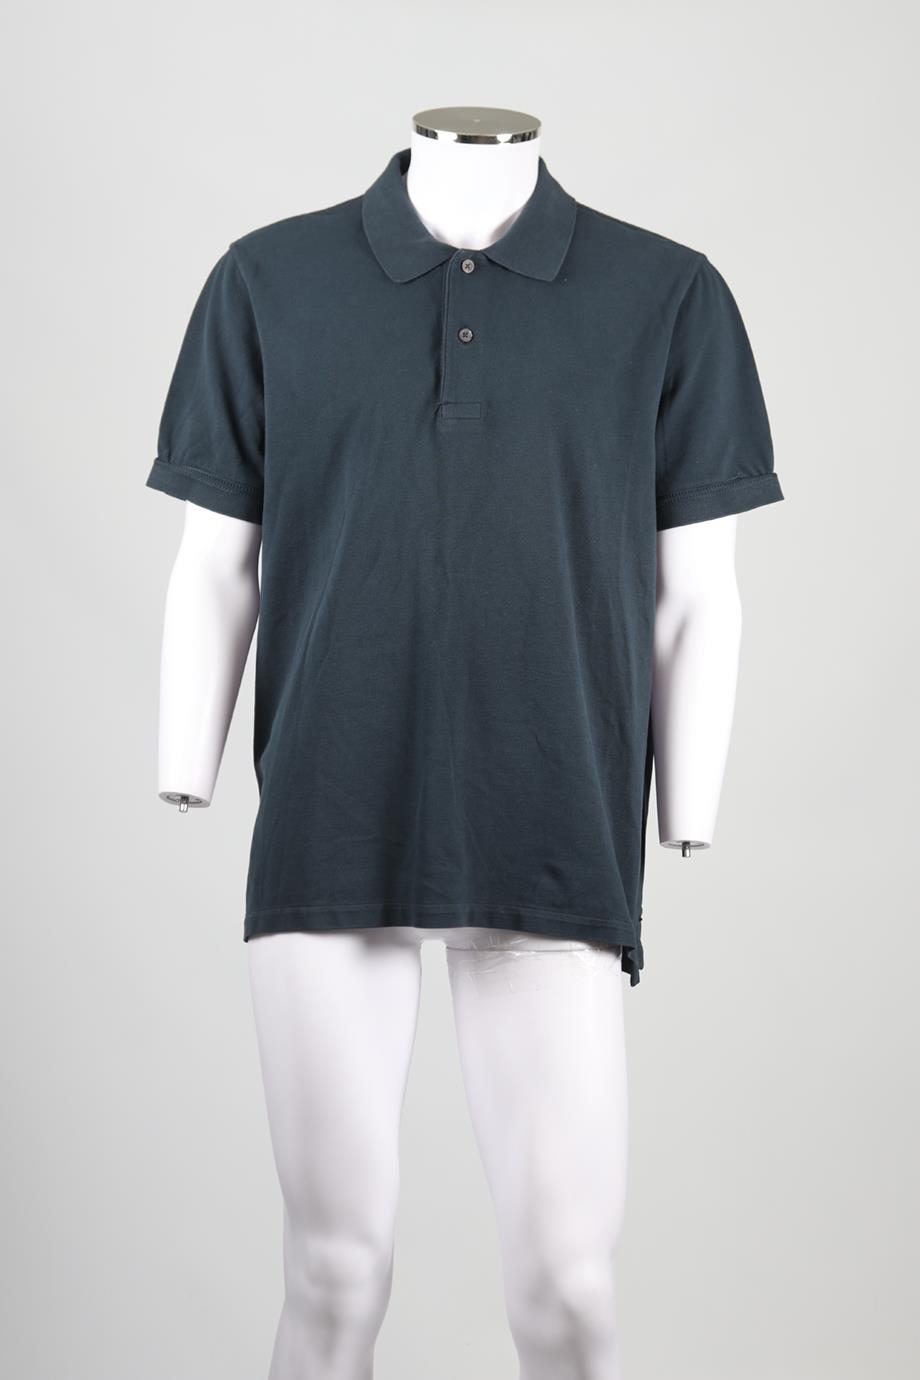 TOM FORD MEN'S COTTON POLO SHIRT LARGE